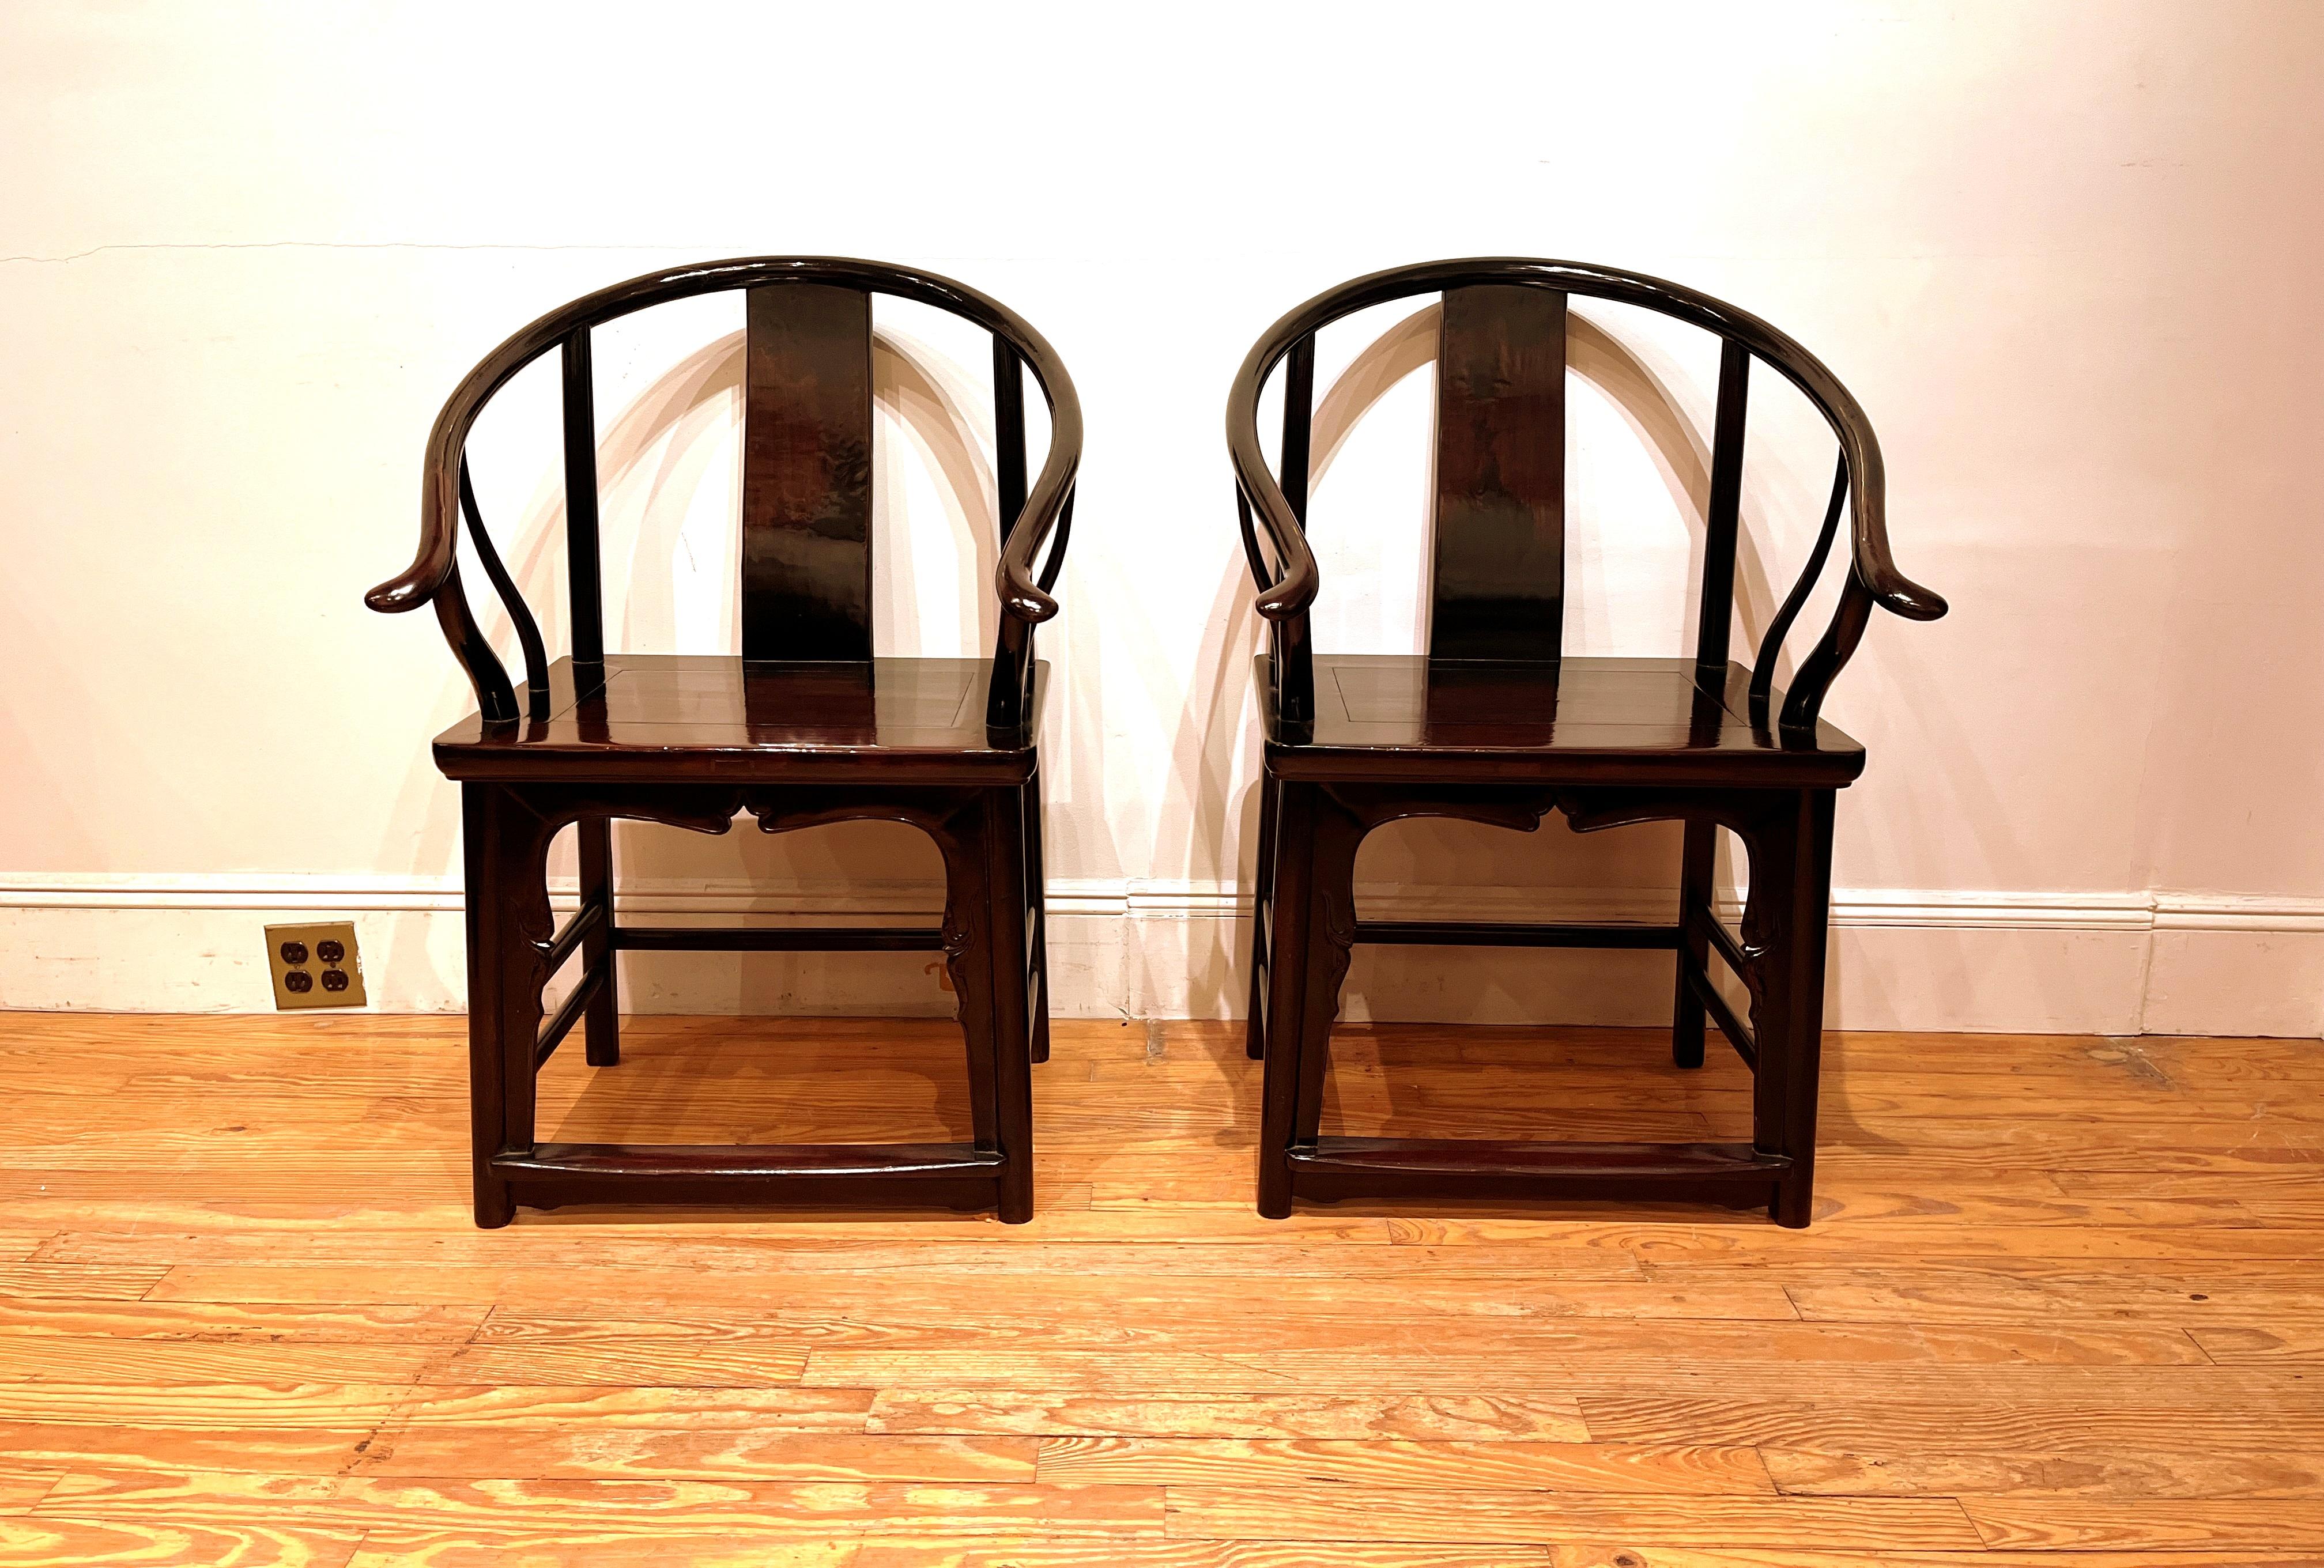 A pair of elegant horseshoe back armchairs. Beautiful form and lines. We carry fine quality furniture with elegant finished and has been appeared many times in 